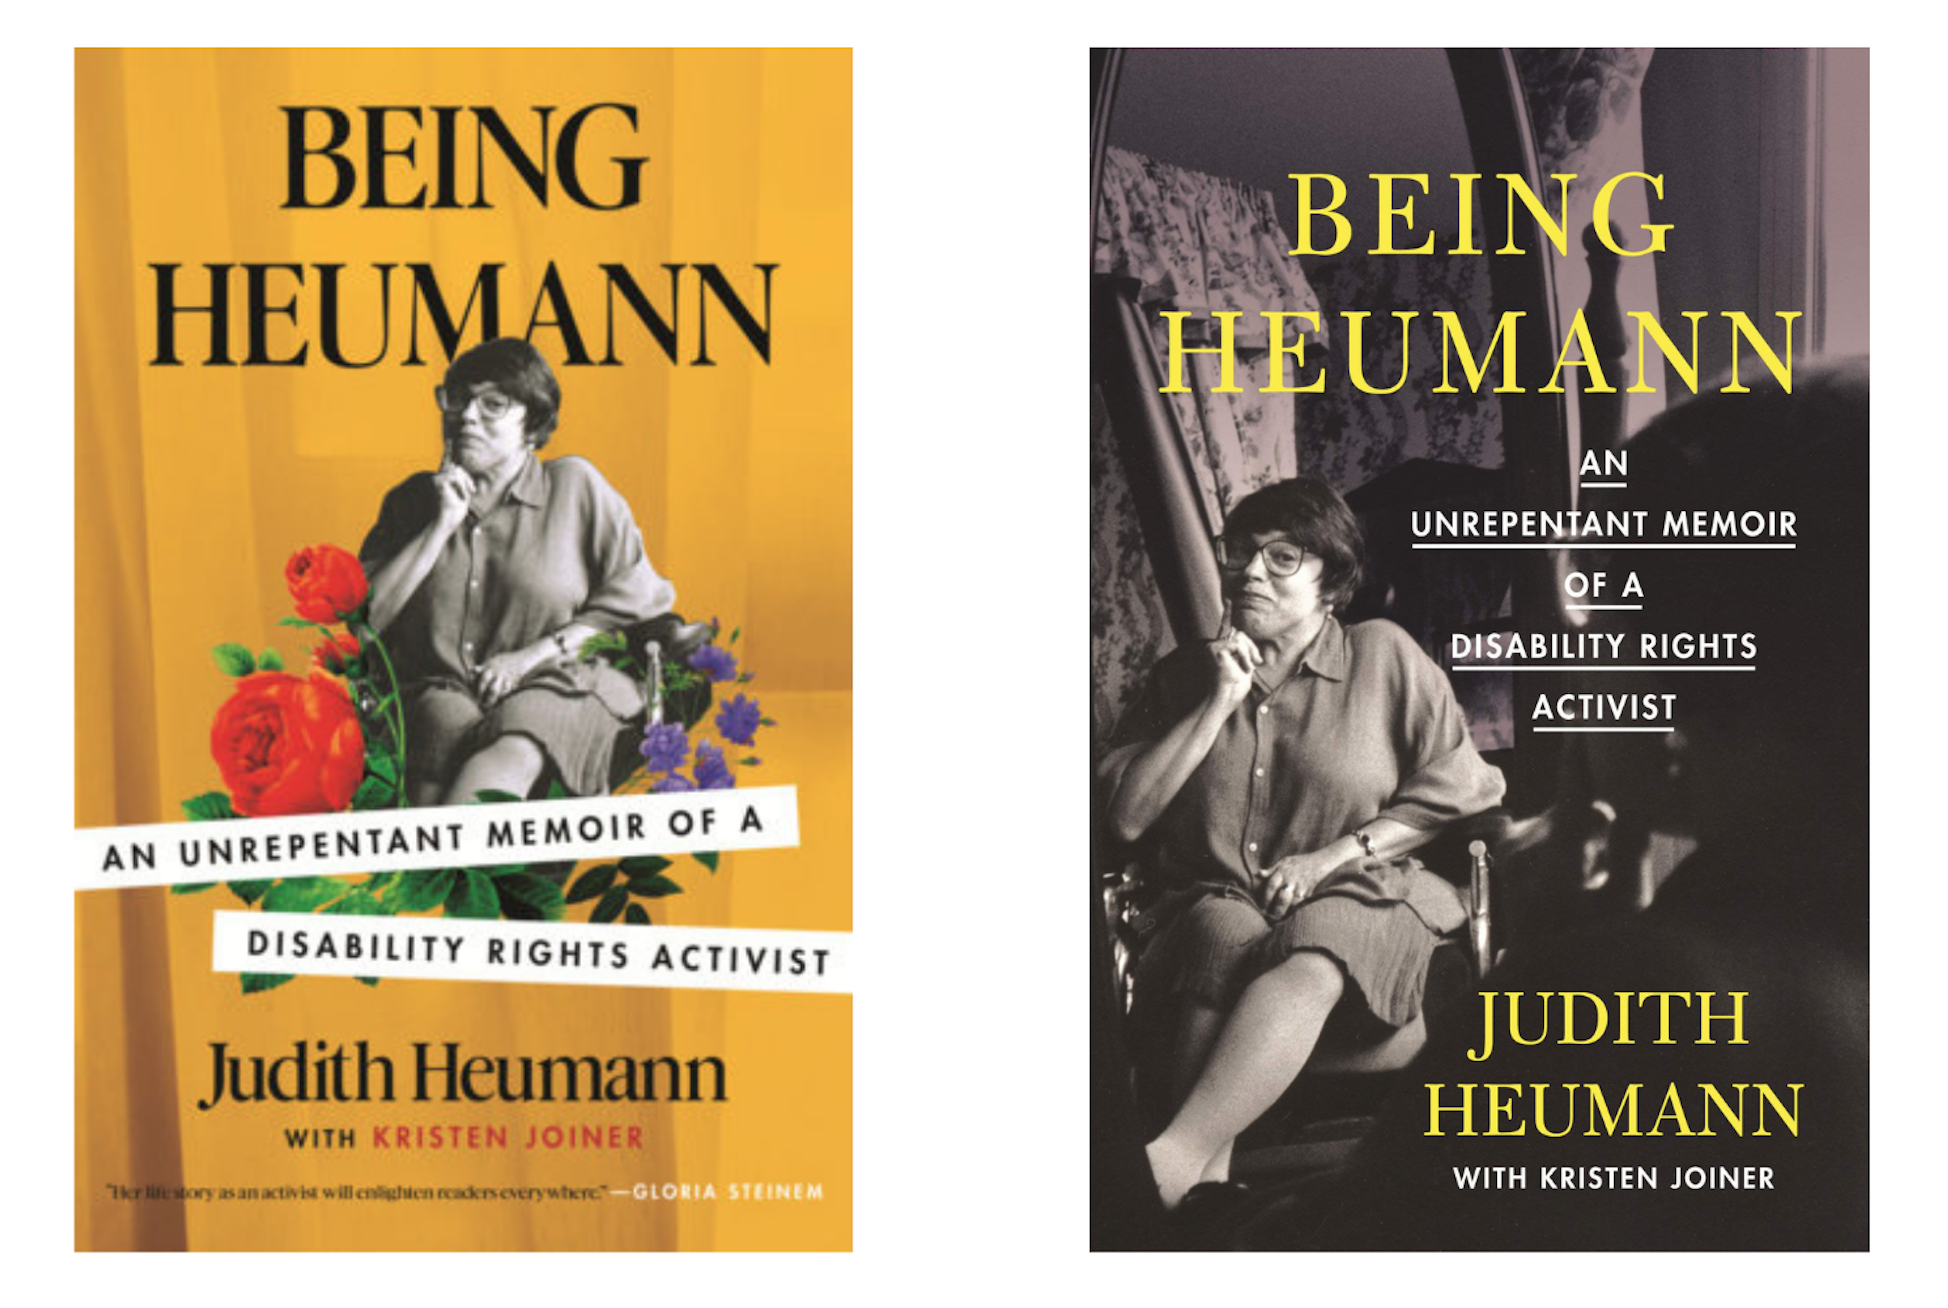 The paperback and hardcover versions of Being Heumann